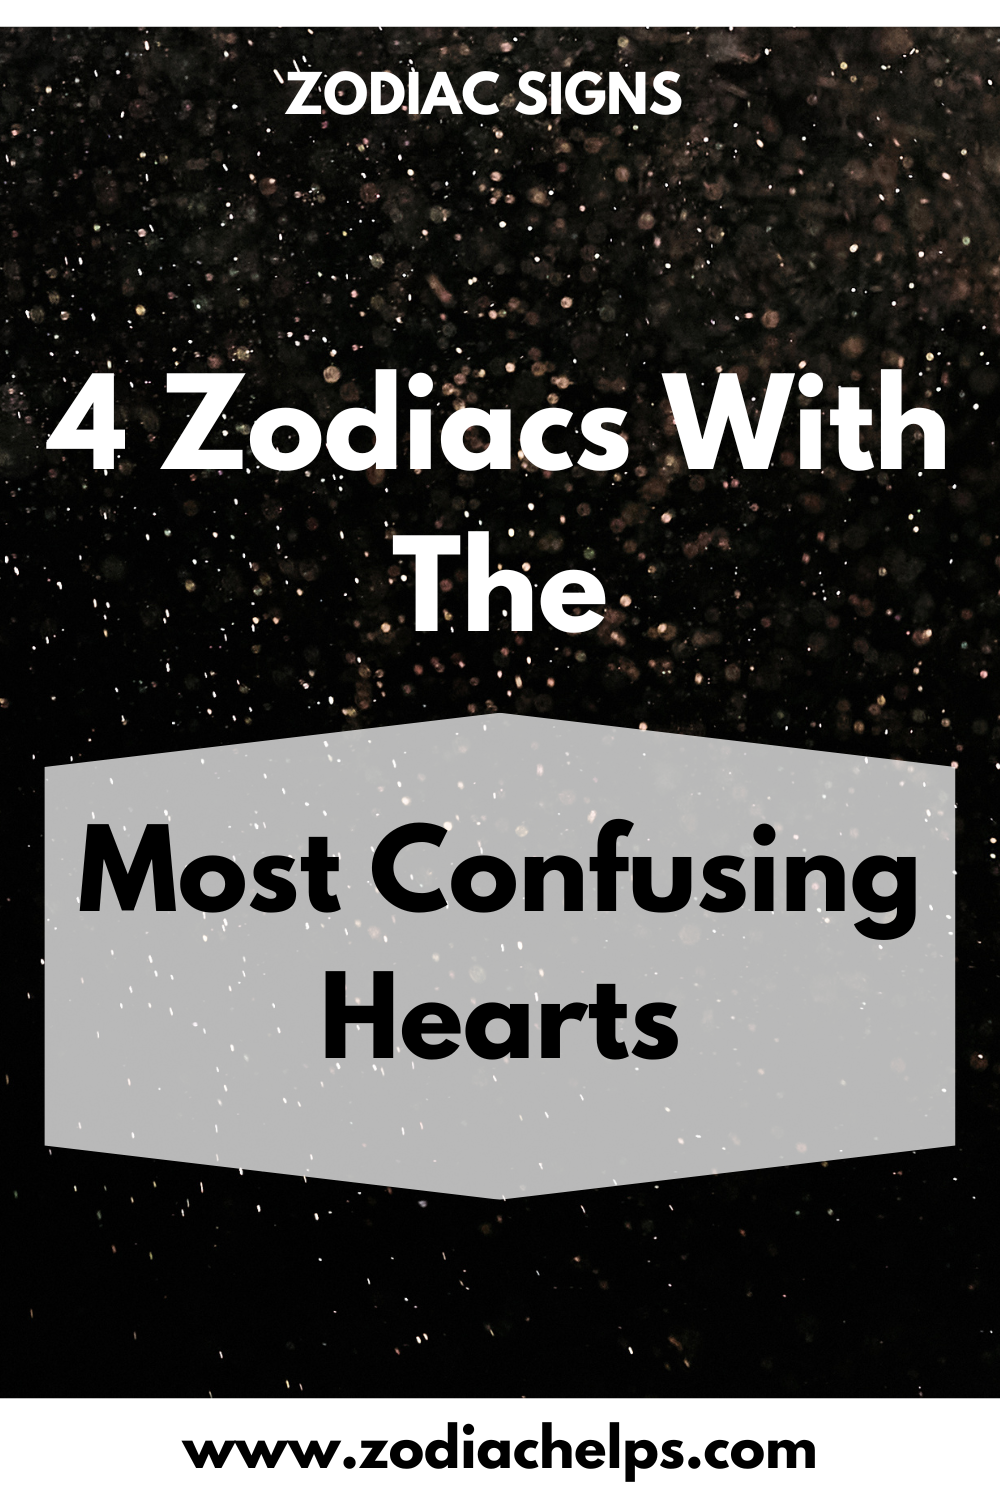 4 Zodiacs With The Most Confusing Hearts